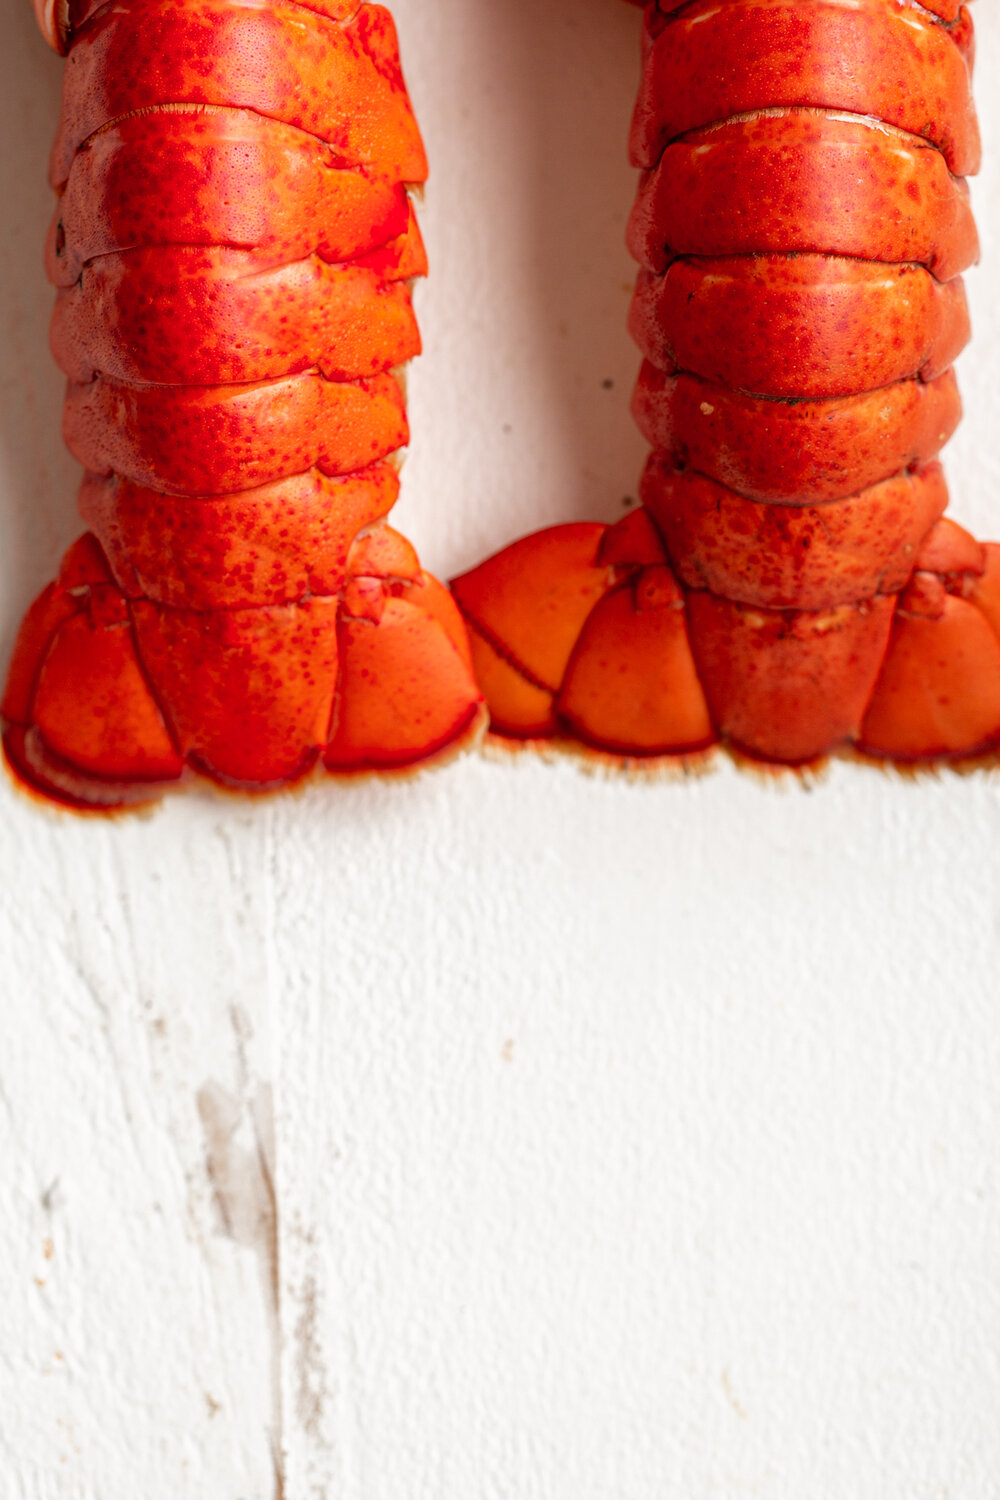 lobster tails